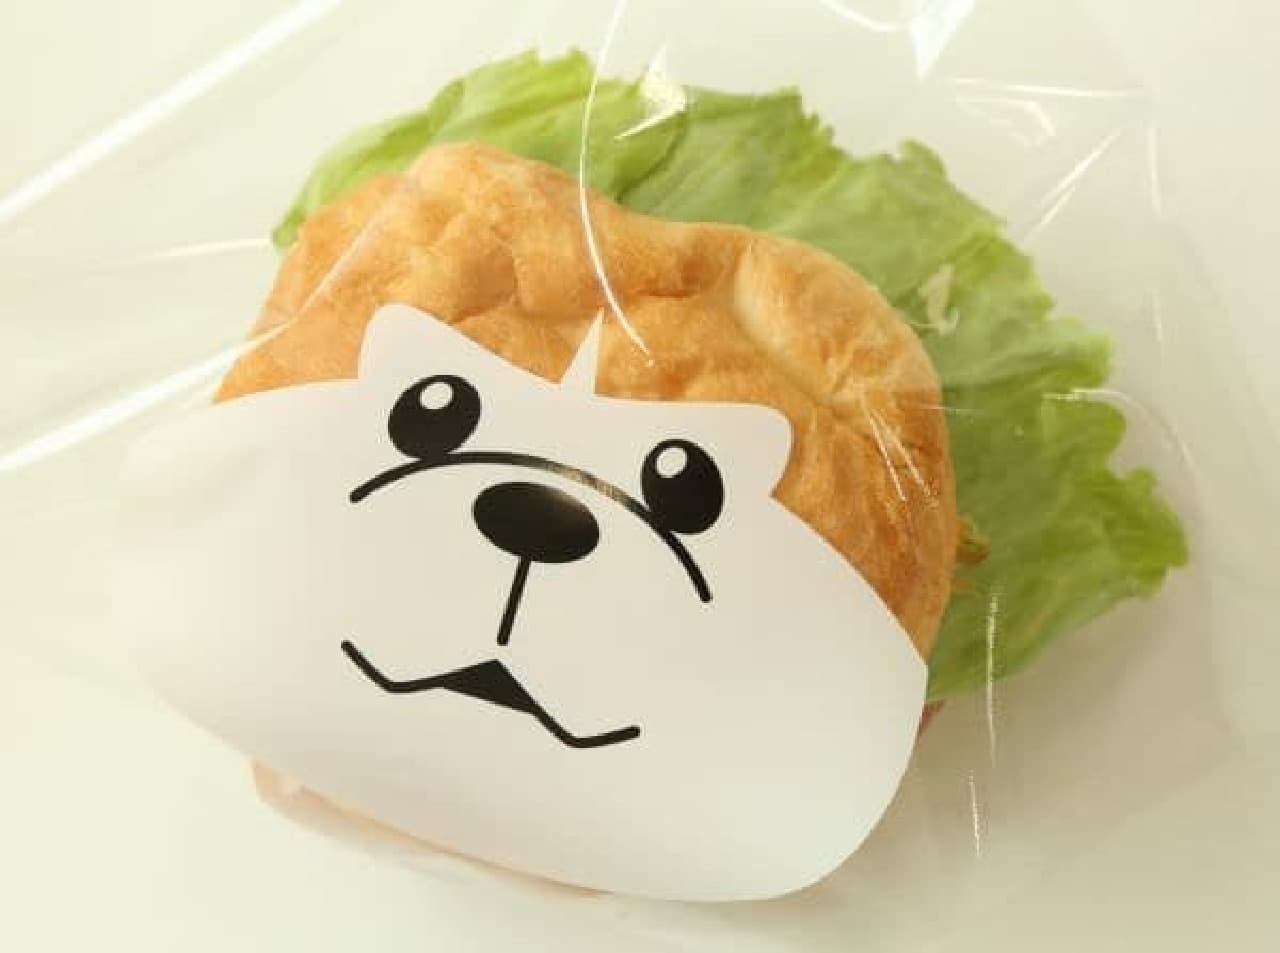 "Hachi DOG" is a hood with a tornado-shaped wiener in the buns of the beckoning bee face.